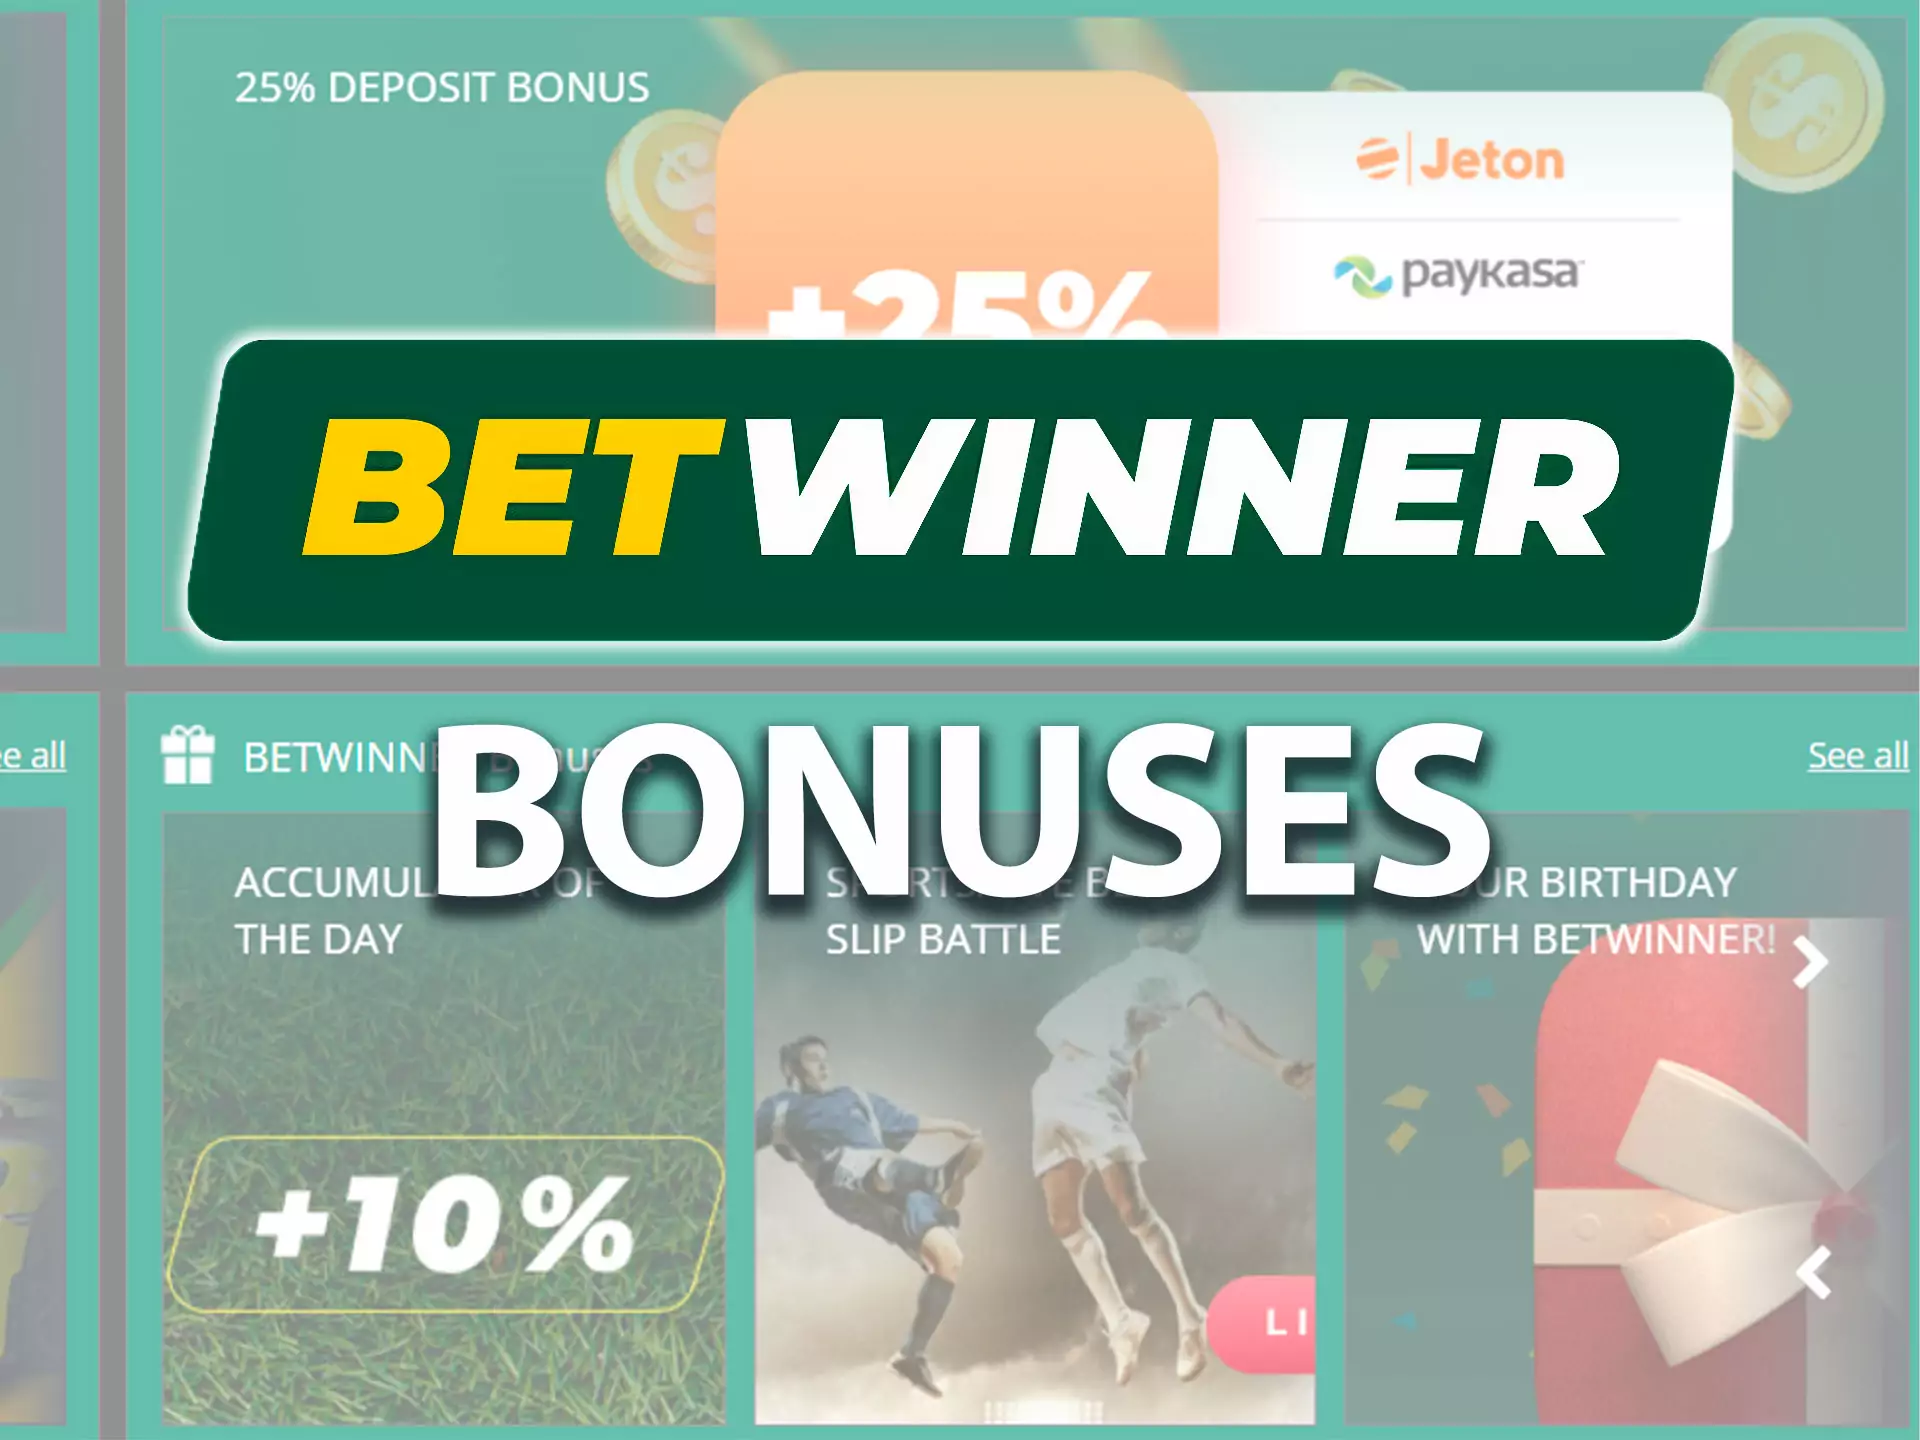 Learn more about Betwinner bonuses on the &#039;PROMO&#039; page.